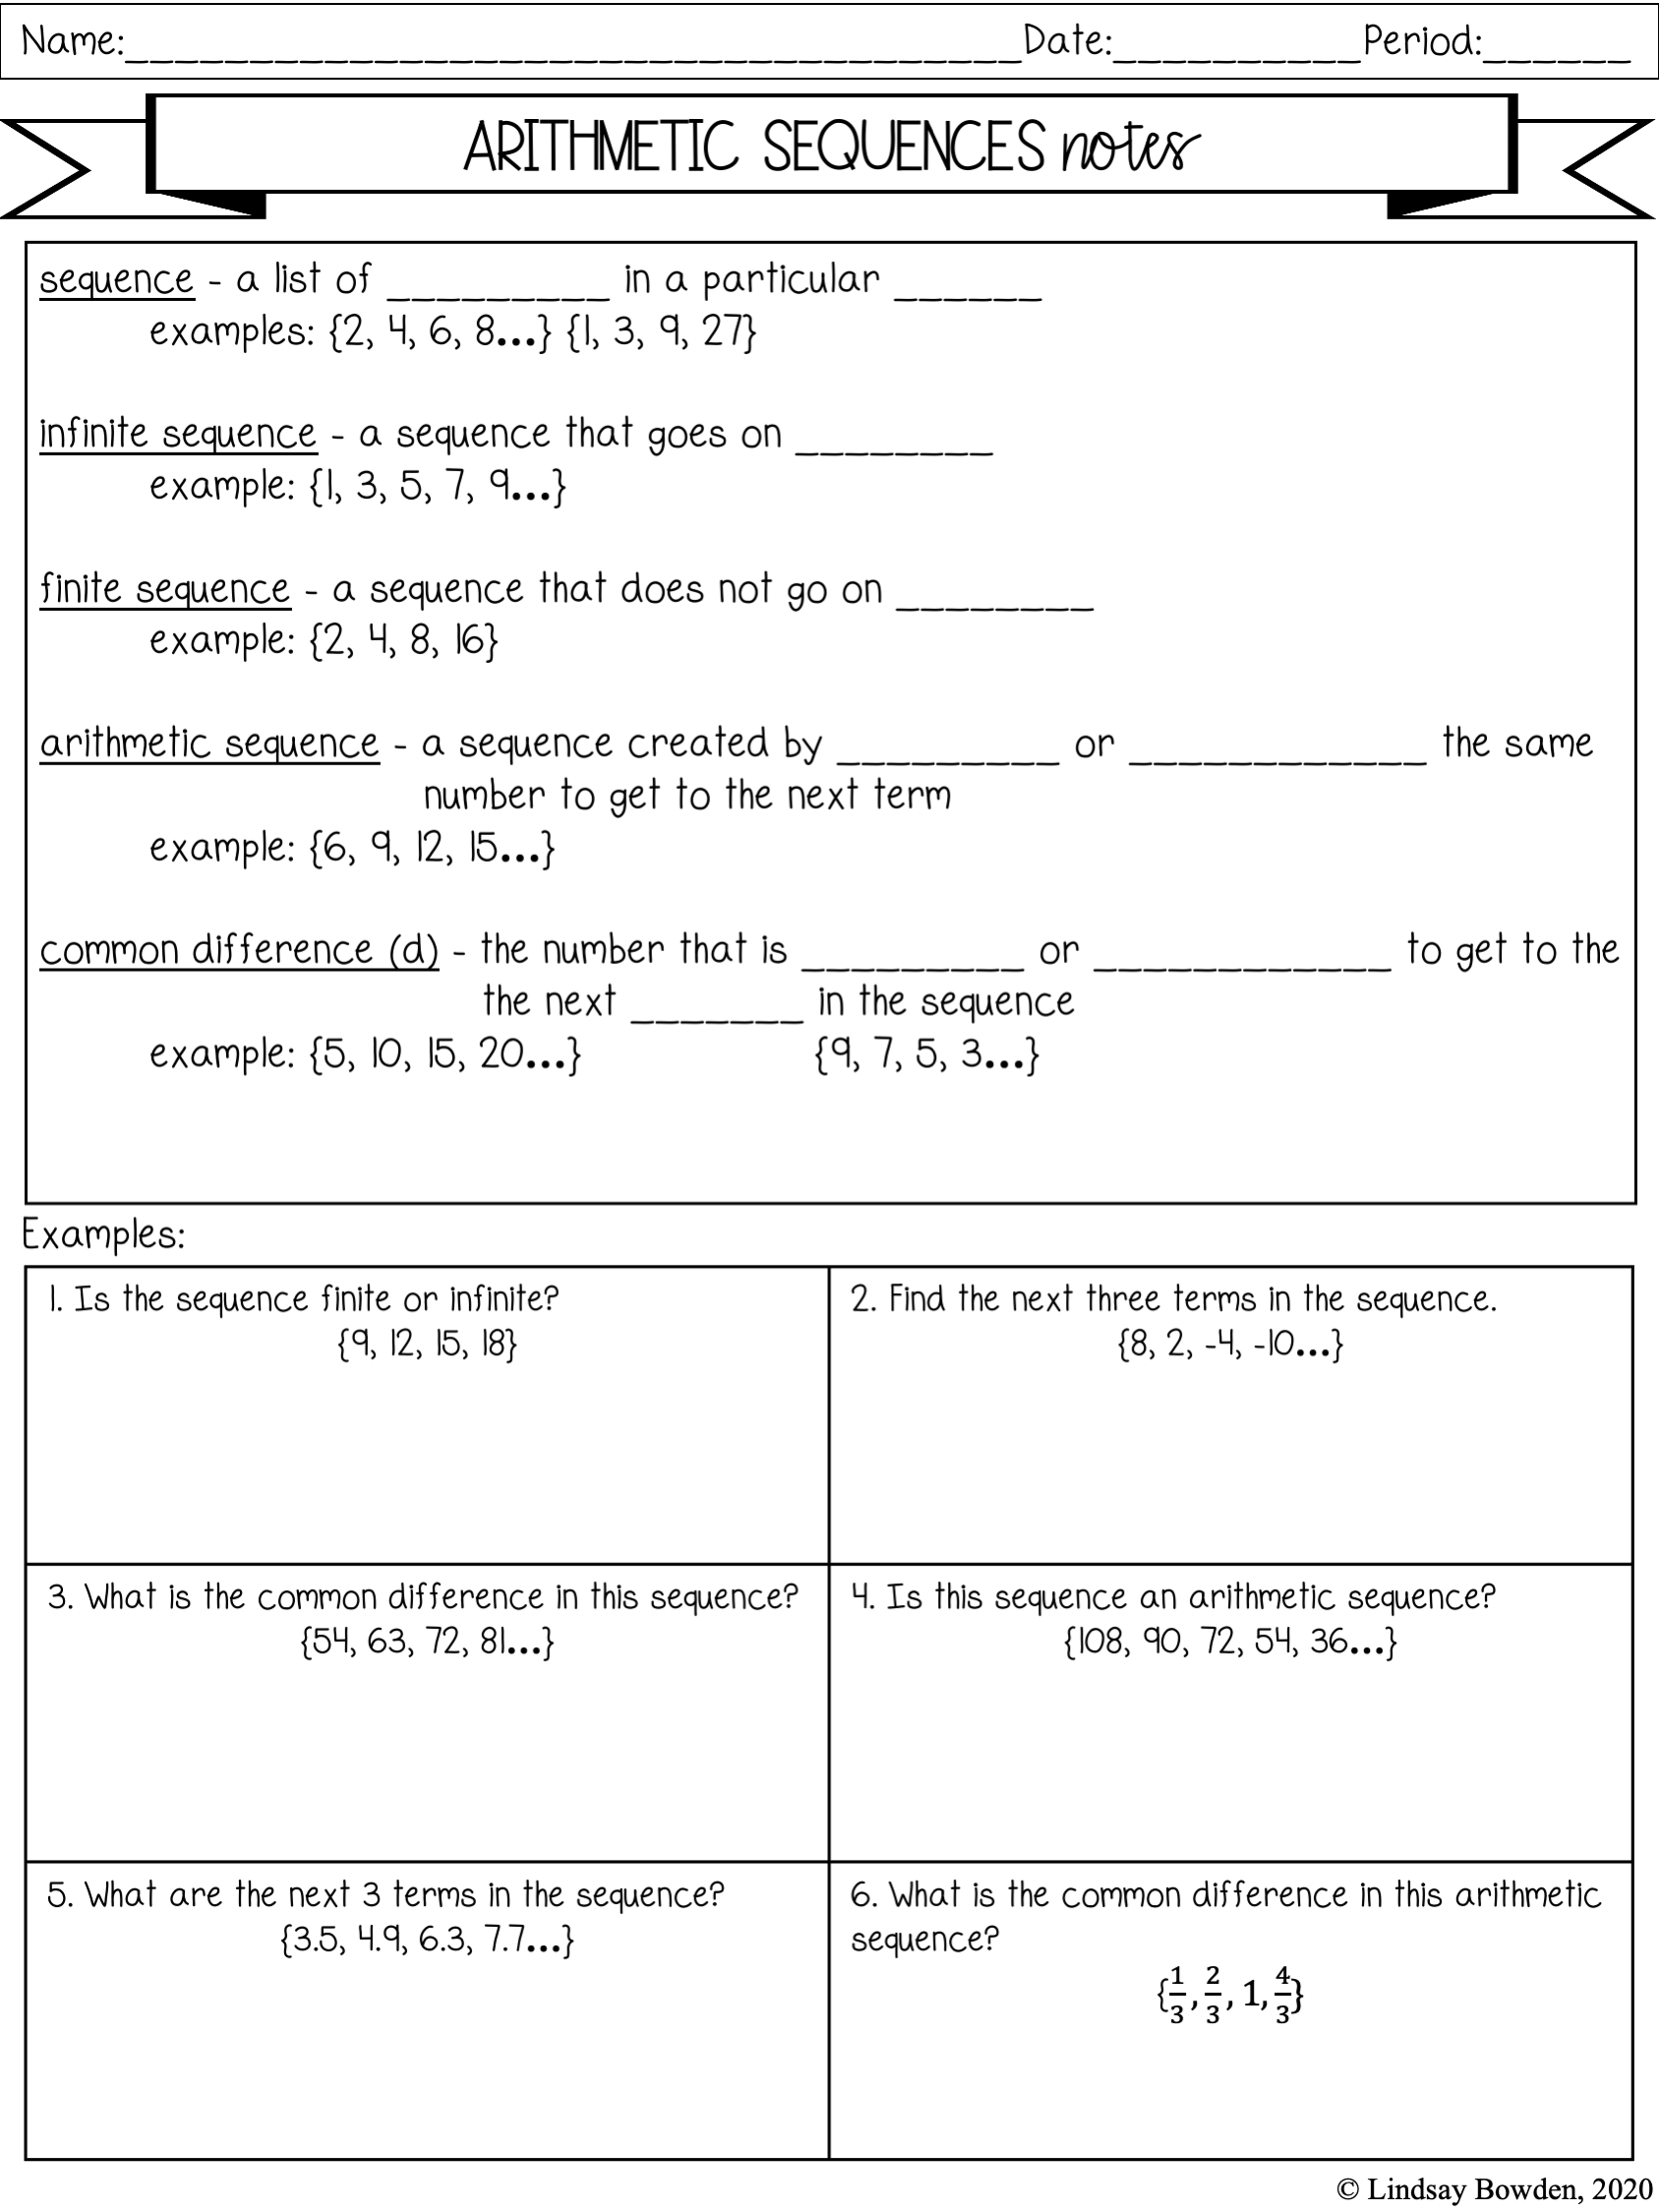 Arithmetic Sequences Notes and Worksheets - Lindsay Bowden Pertaining To Arithmetic Sequence Worksheet Answers